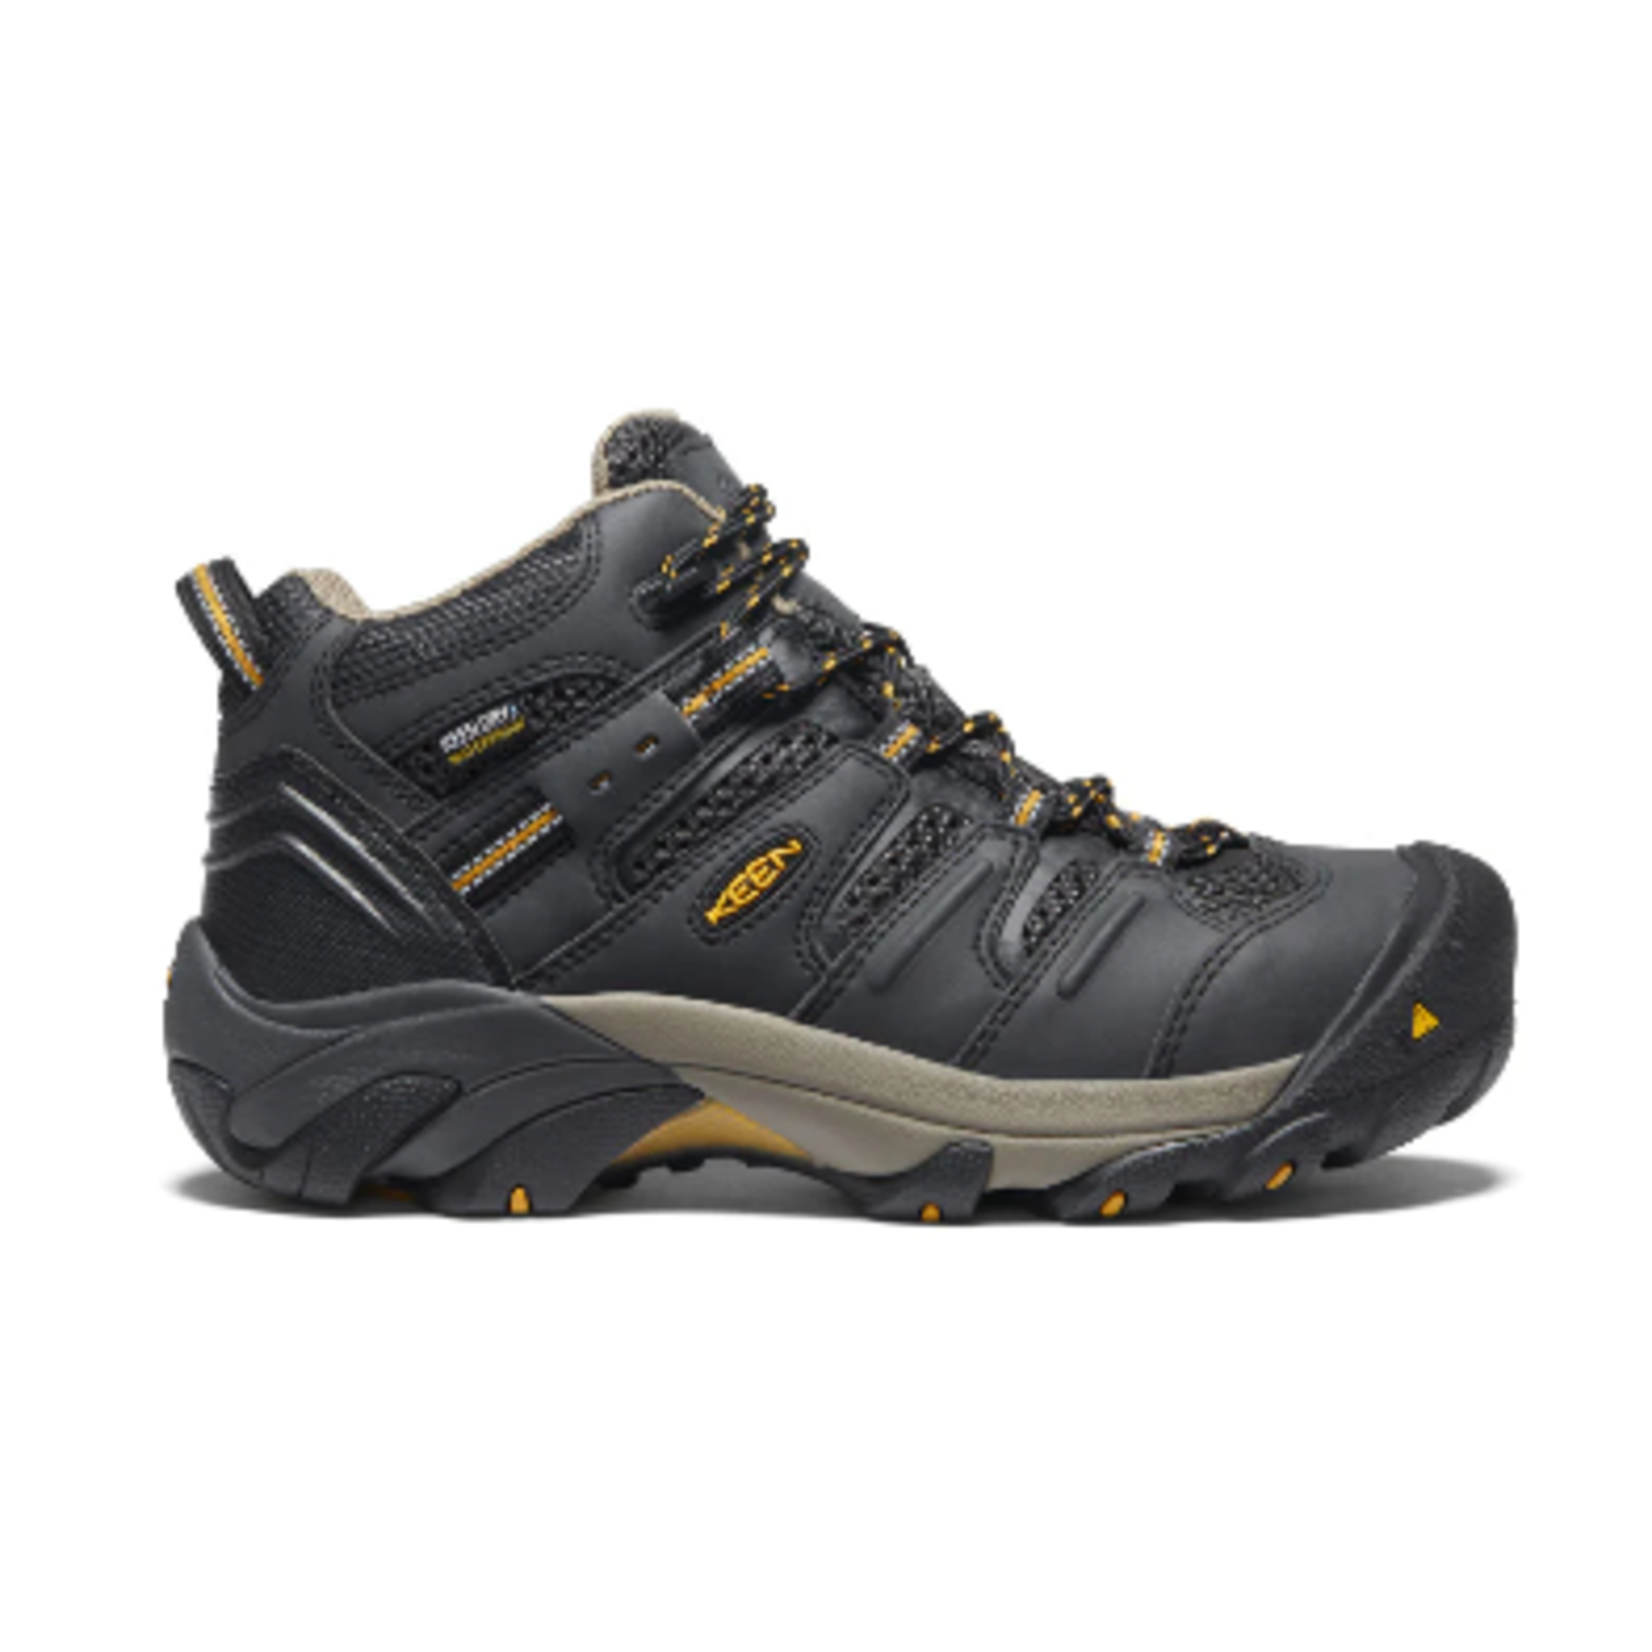 Keen Lansing Mid WP Women’s Steel Toe Safety Boots - Shippy Shoes